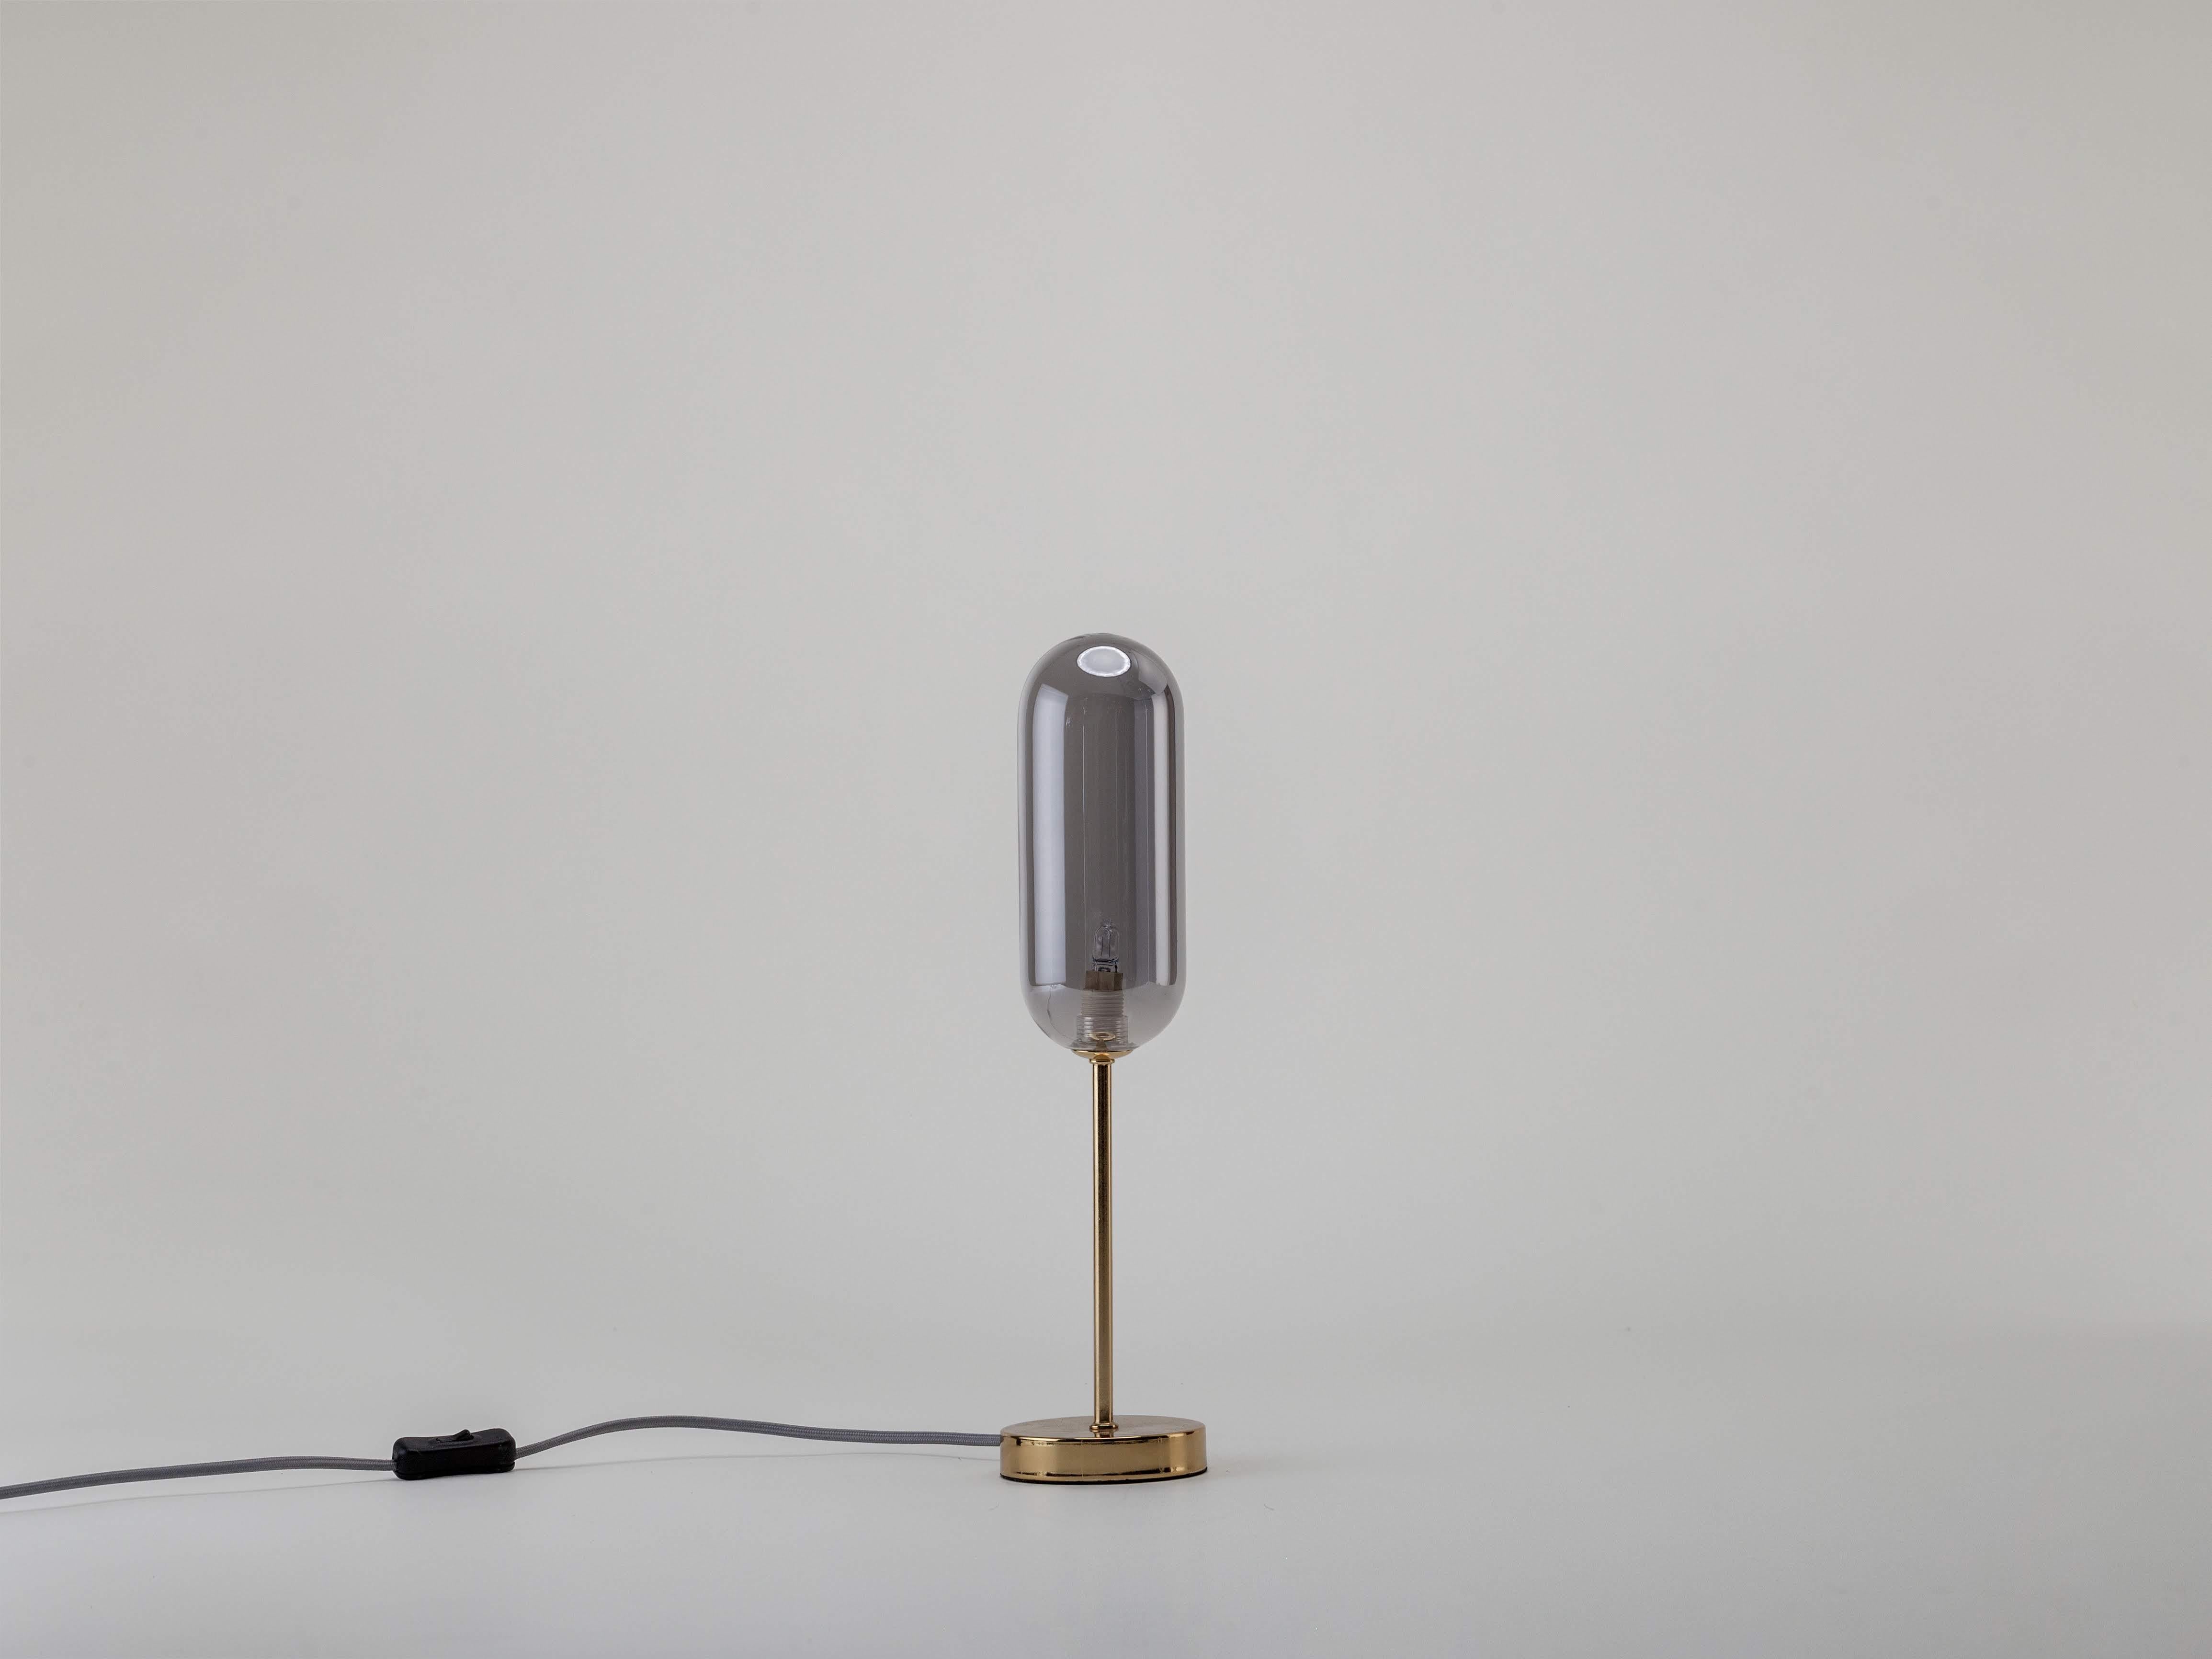 Contemporary and compact, this fun table lamp has all the style without the giant footprint, perfect for illuminating a room without taking up space. Moody smoked glass contrasts with the reflective brass arm and base for a stylish, modern design.